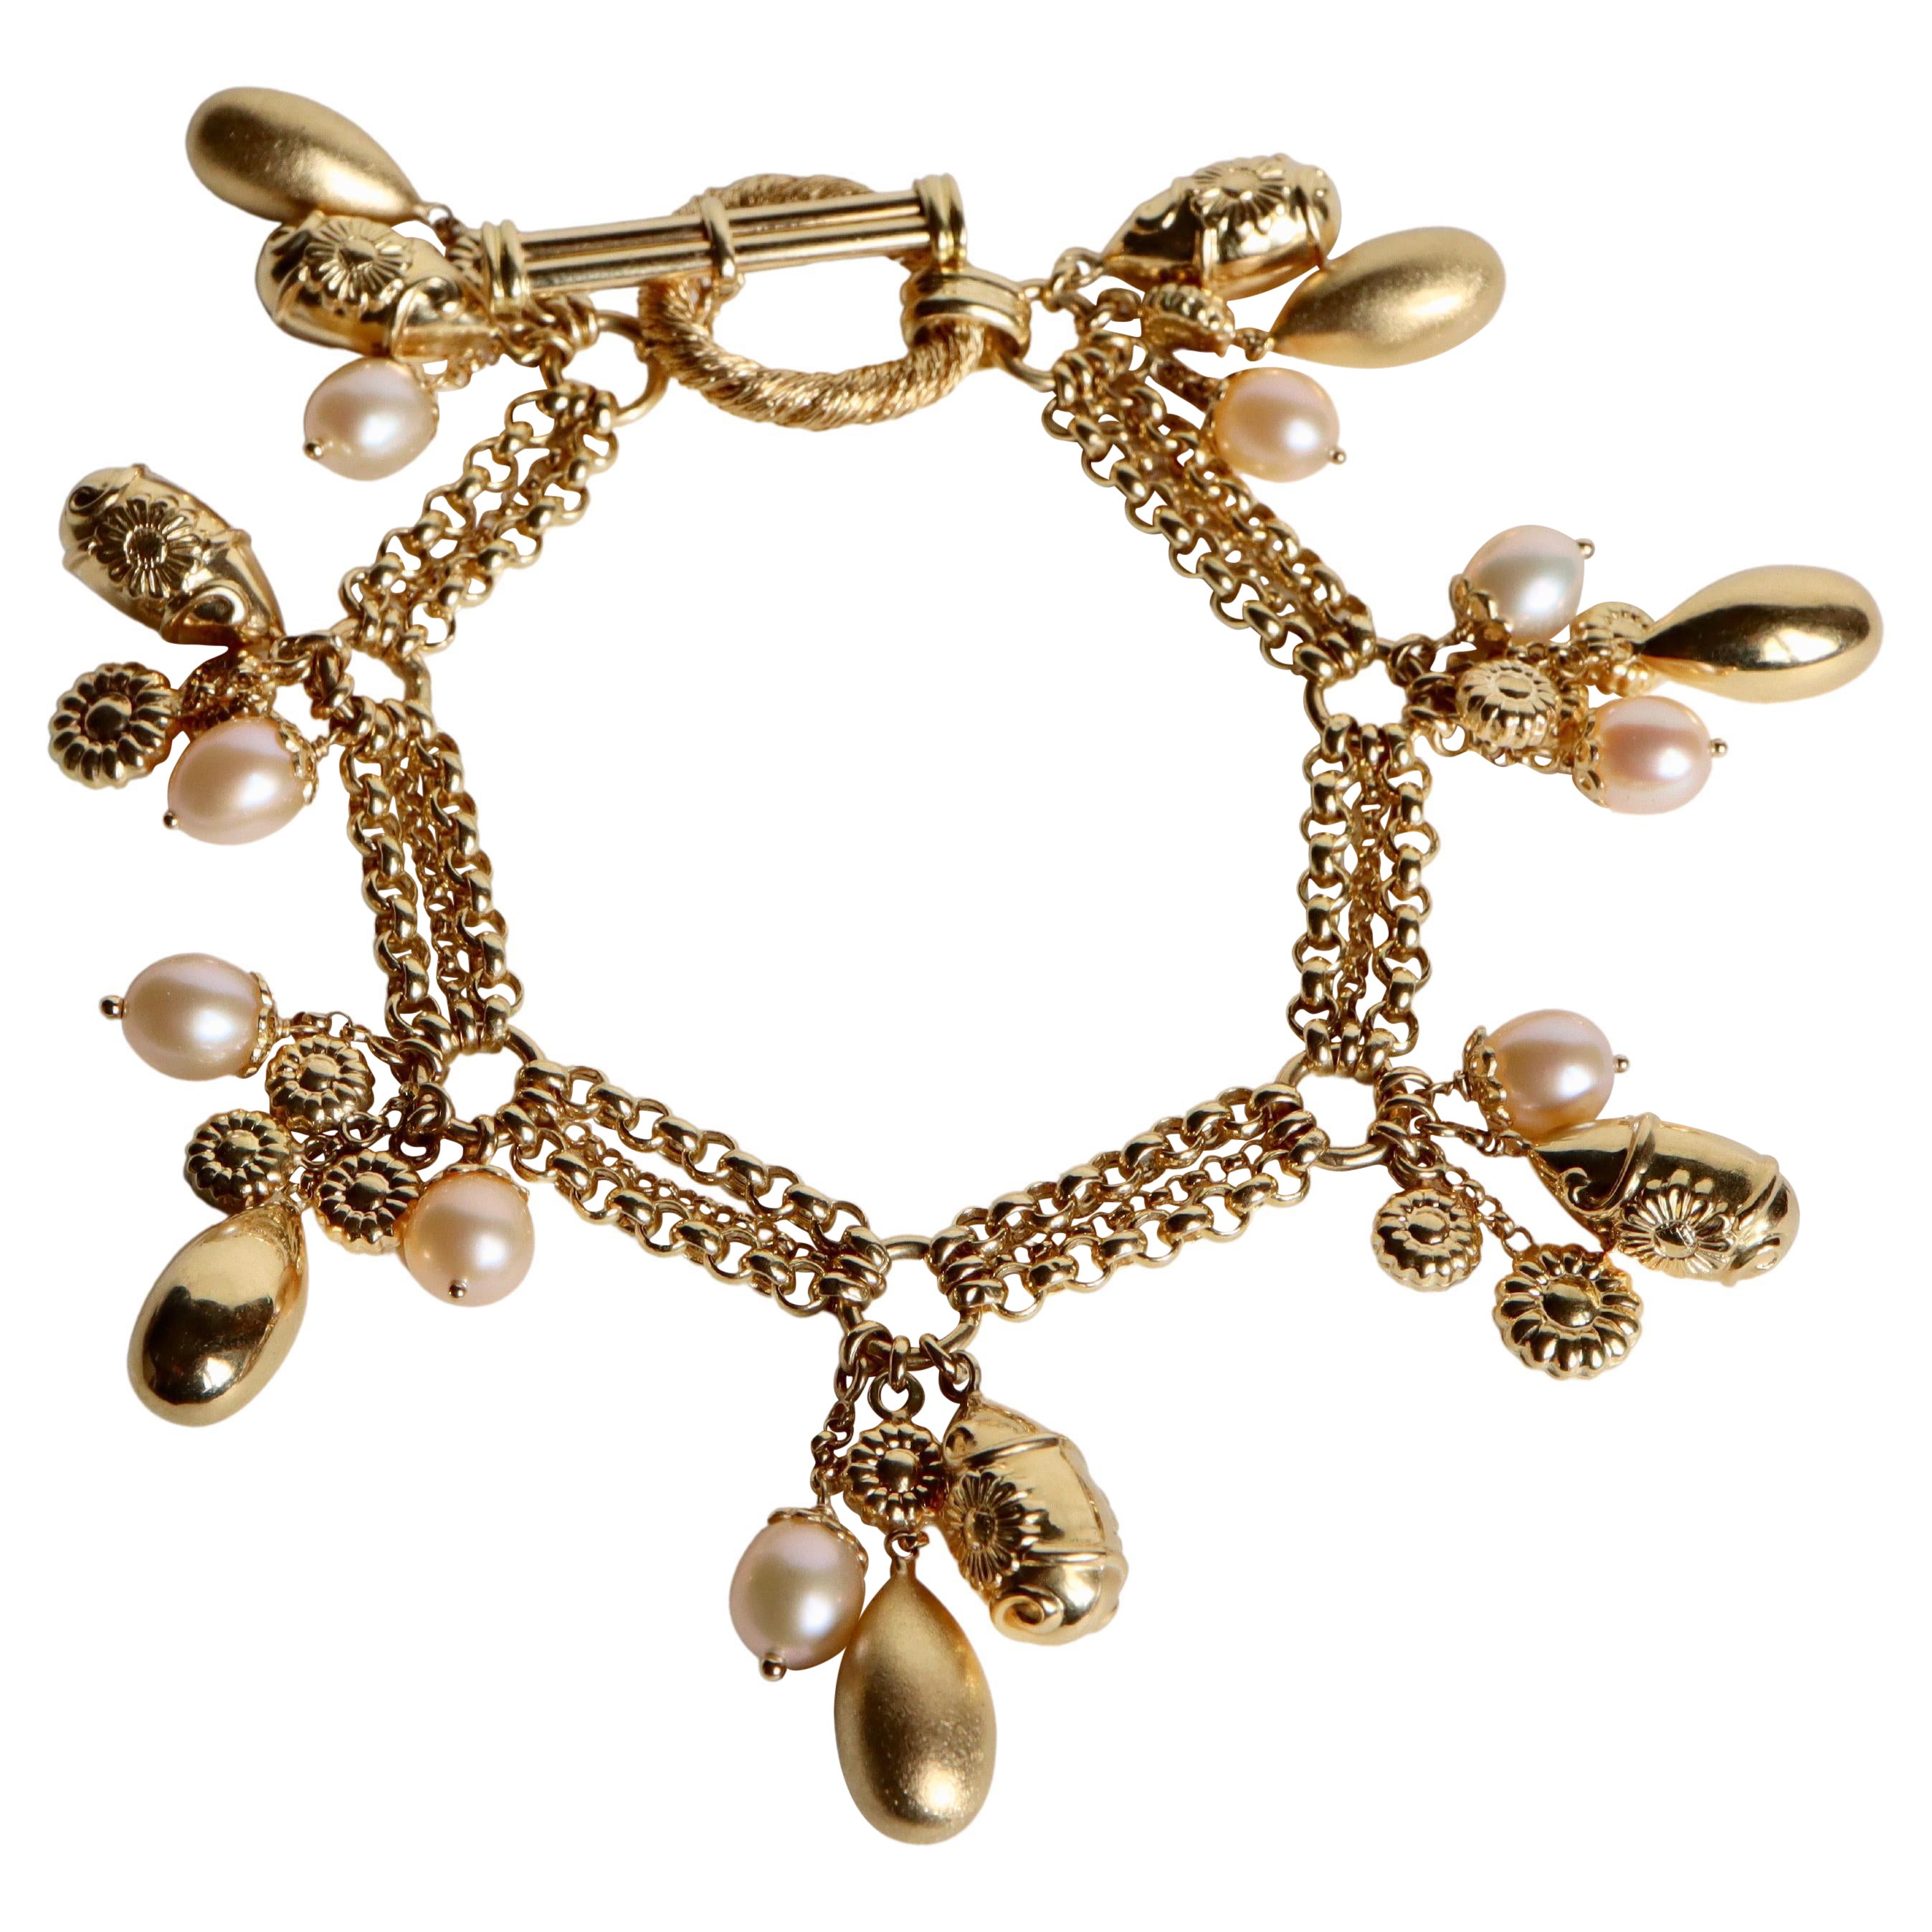 Charm Bracelet in 18k Yellow Gold and Pearls